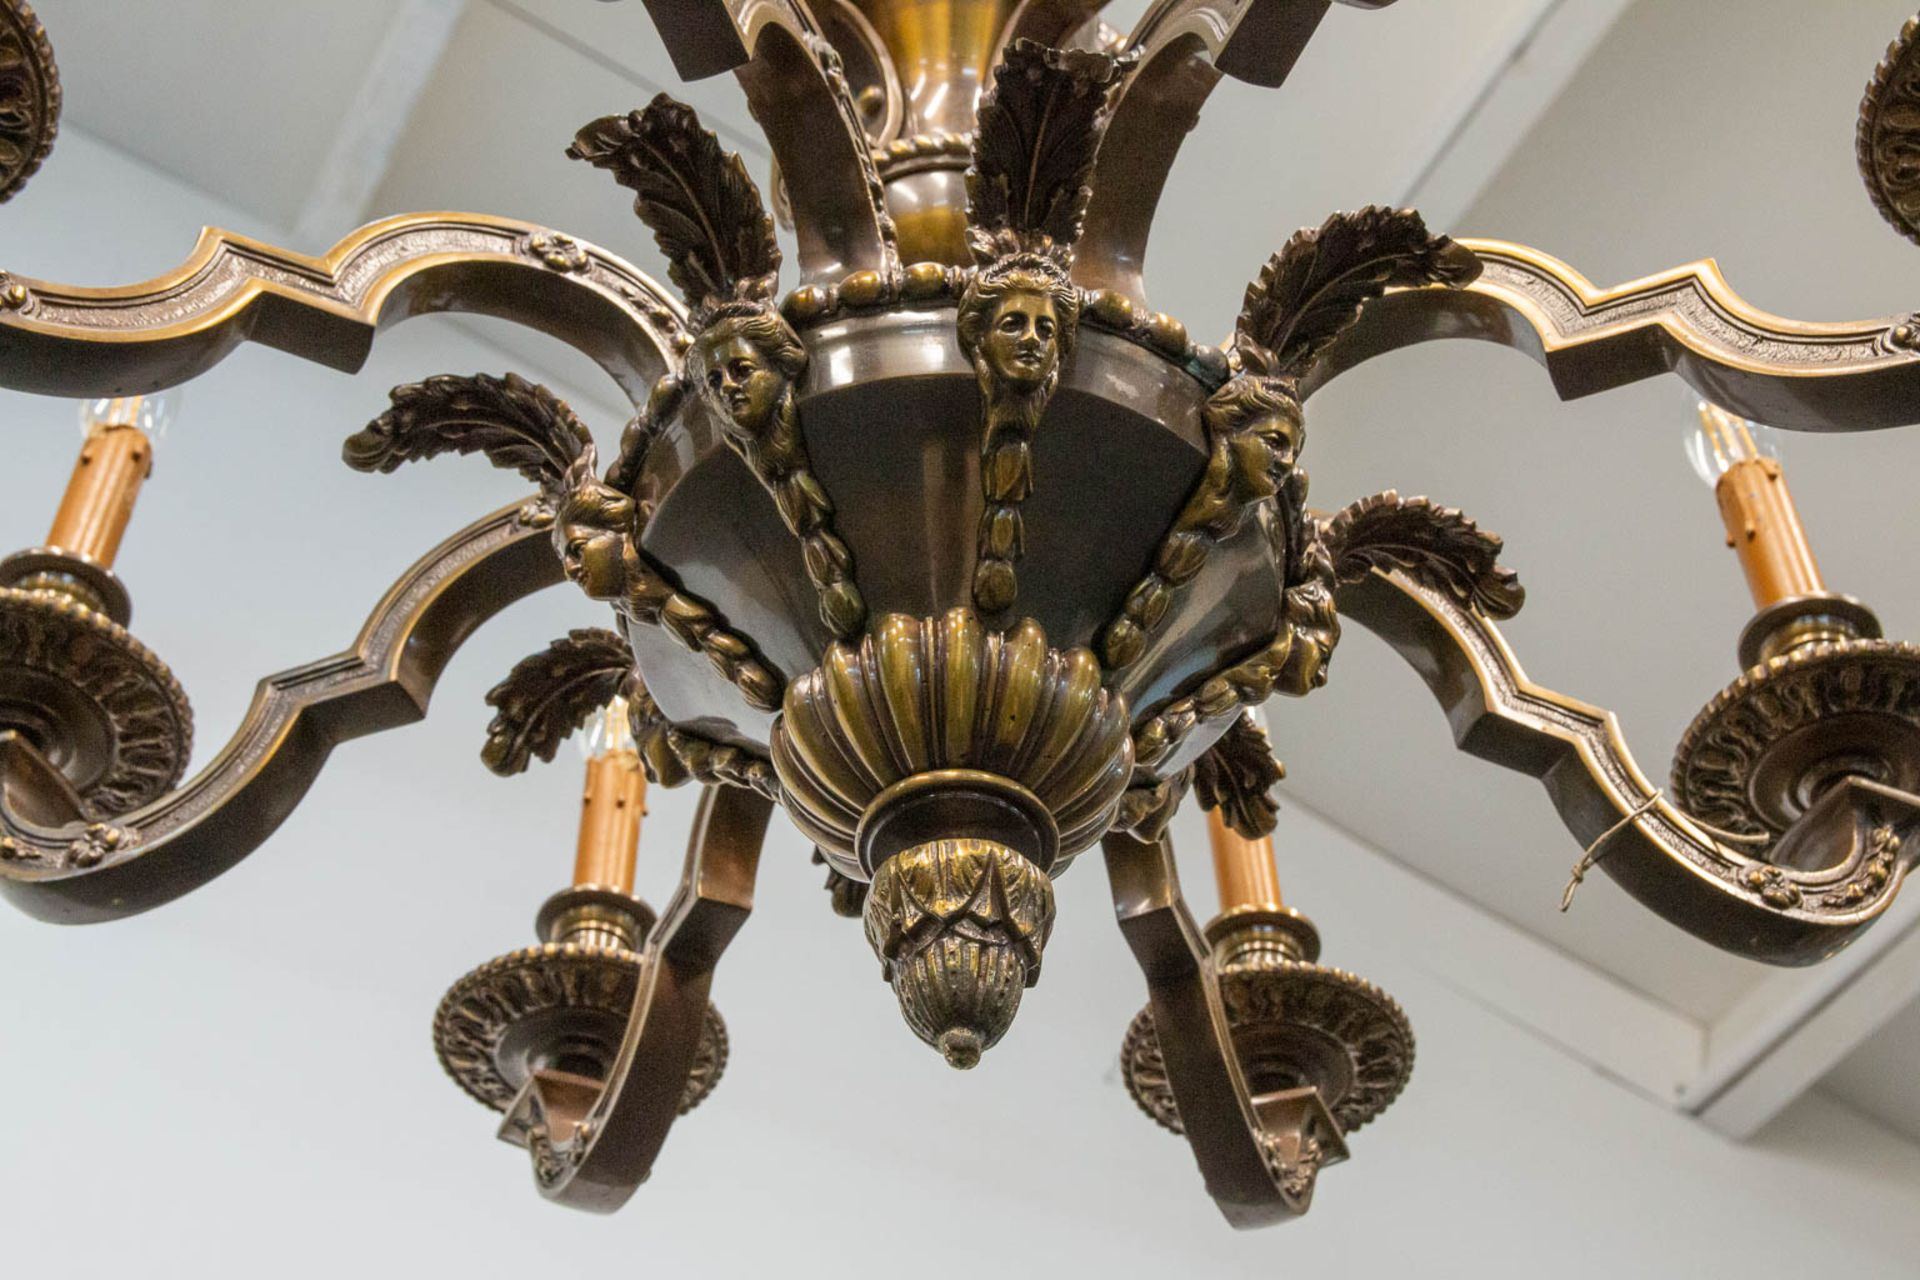 A bronze Mazarin Chandelier with 8 points of light. - Image 12 of 15